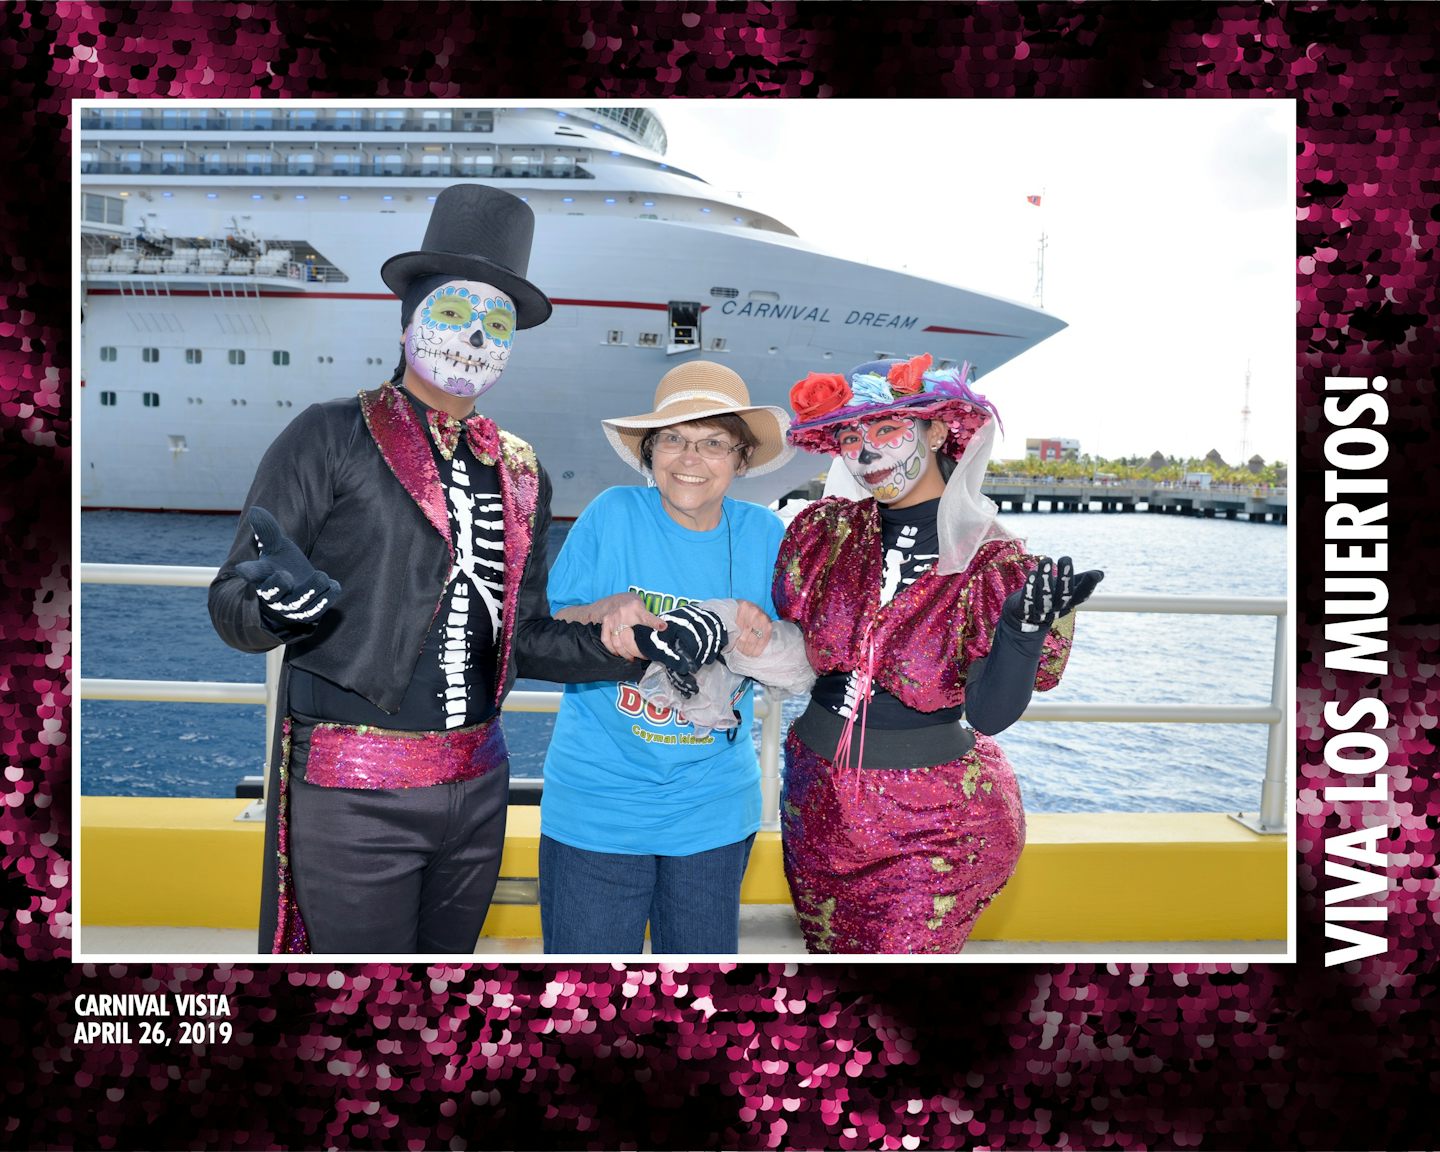 I just had a wonderful time on the Carnival Vista! I can’t walk long distances so I took my wheelchair and rented a scootaround. Everyone was so kind and wonderful! 
I can’t understand why everyone doesn’t cruise! Where else can you get a wonderful room, a plethora of food options, free game activities, free comedy clubs, free dance clubs, multiple pools (one with a water slide), air bicycle ride, rope obstacle course, fitness area, spa, hot tubs, duty free shopping, free movies (inside your room or on the big screen),  casino (slots and tables), wine tastings, art auction, massages, hair and nail services. And a staff that is made up of angels! 

Had two small glitches but mostly it was heaven! And then the topper is off-ship excursions that are aimed to satisfy your curiosity for history, island life, sea life, and adventure. 

Come prepared for fun and pampering, Carnival excels at that!
